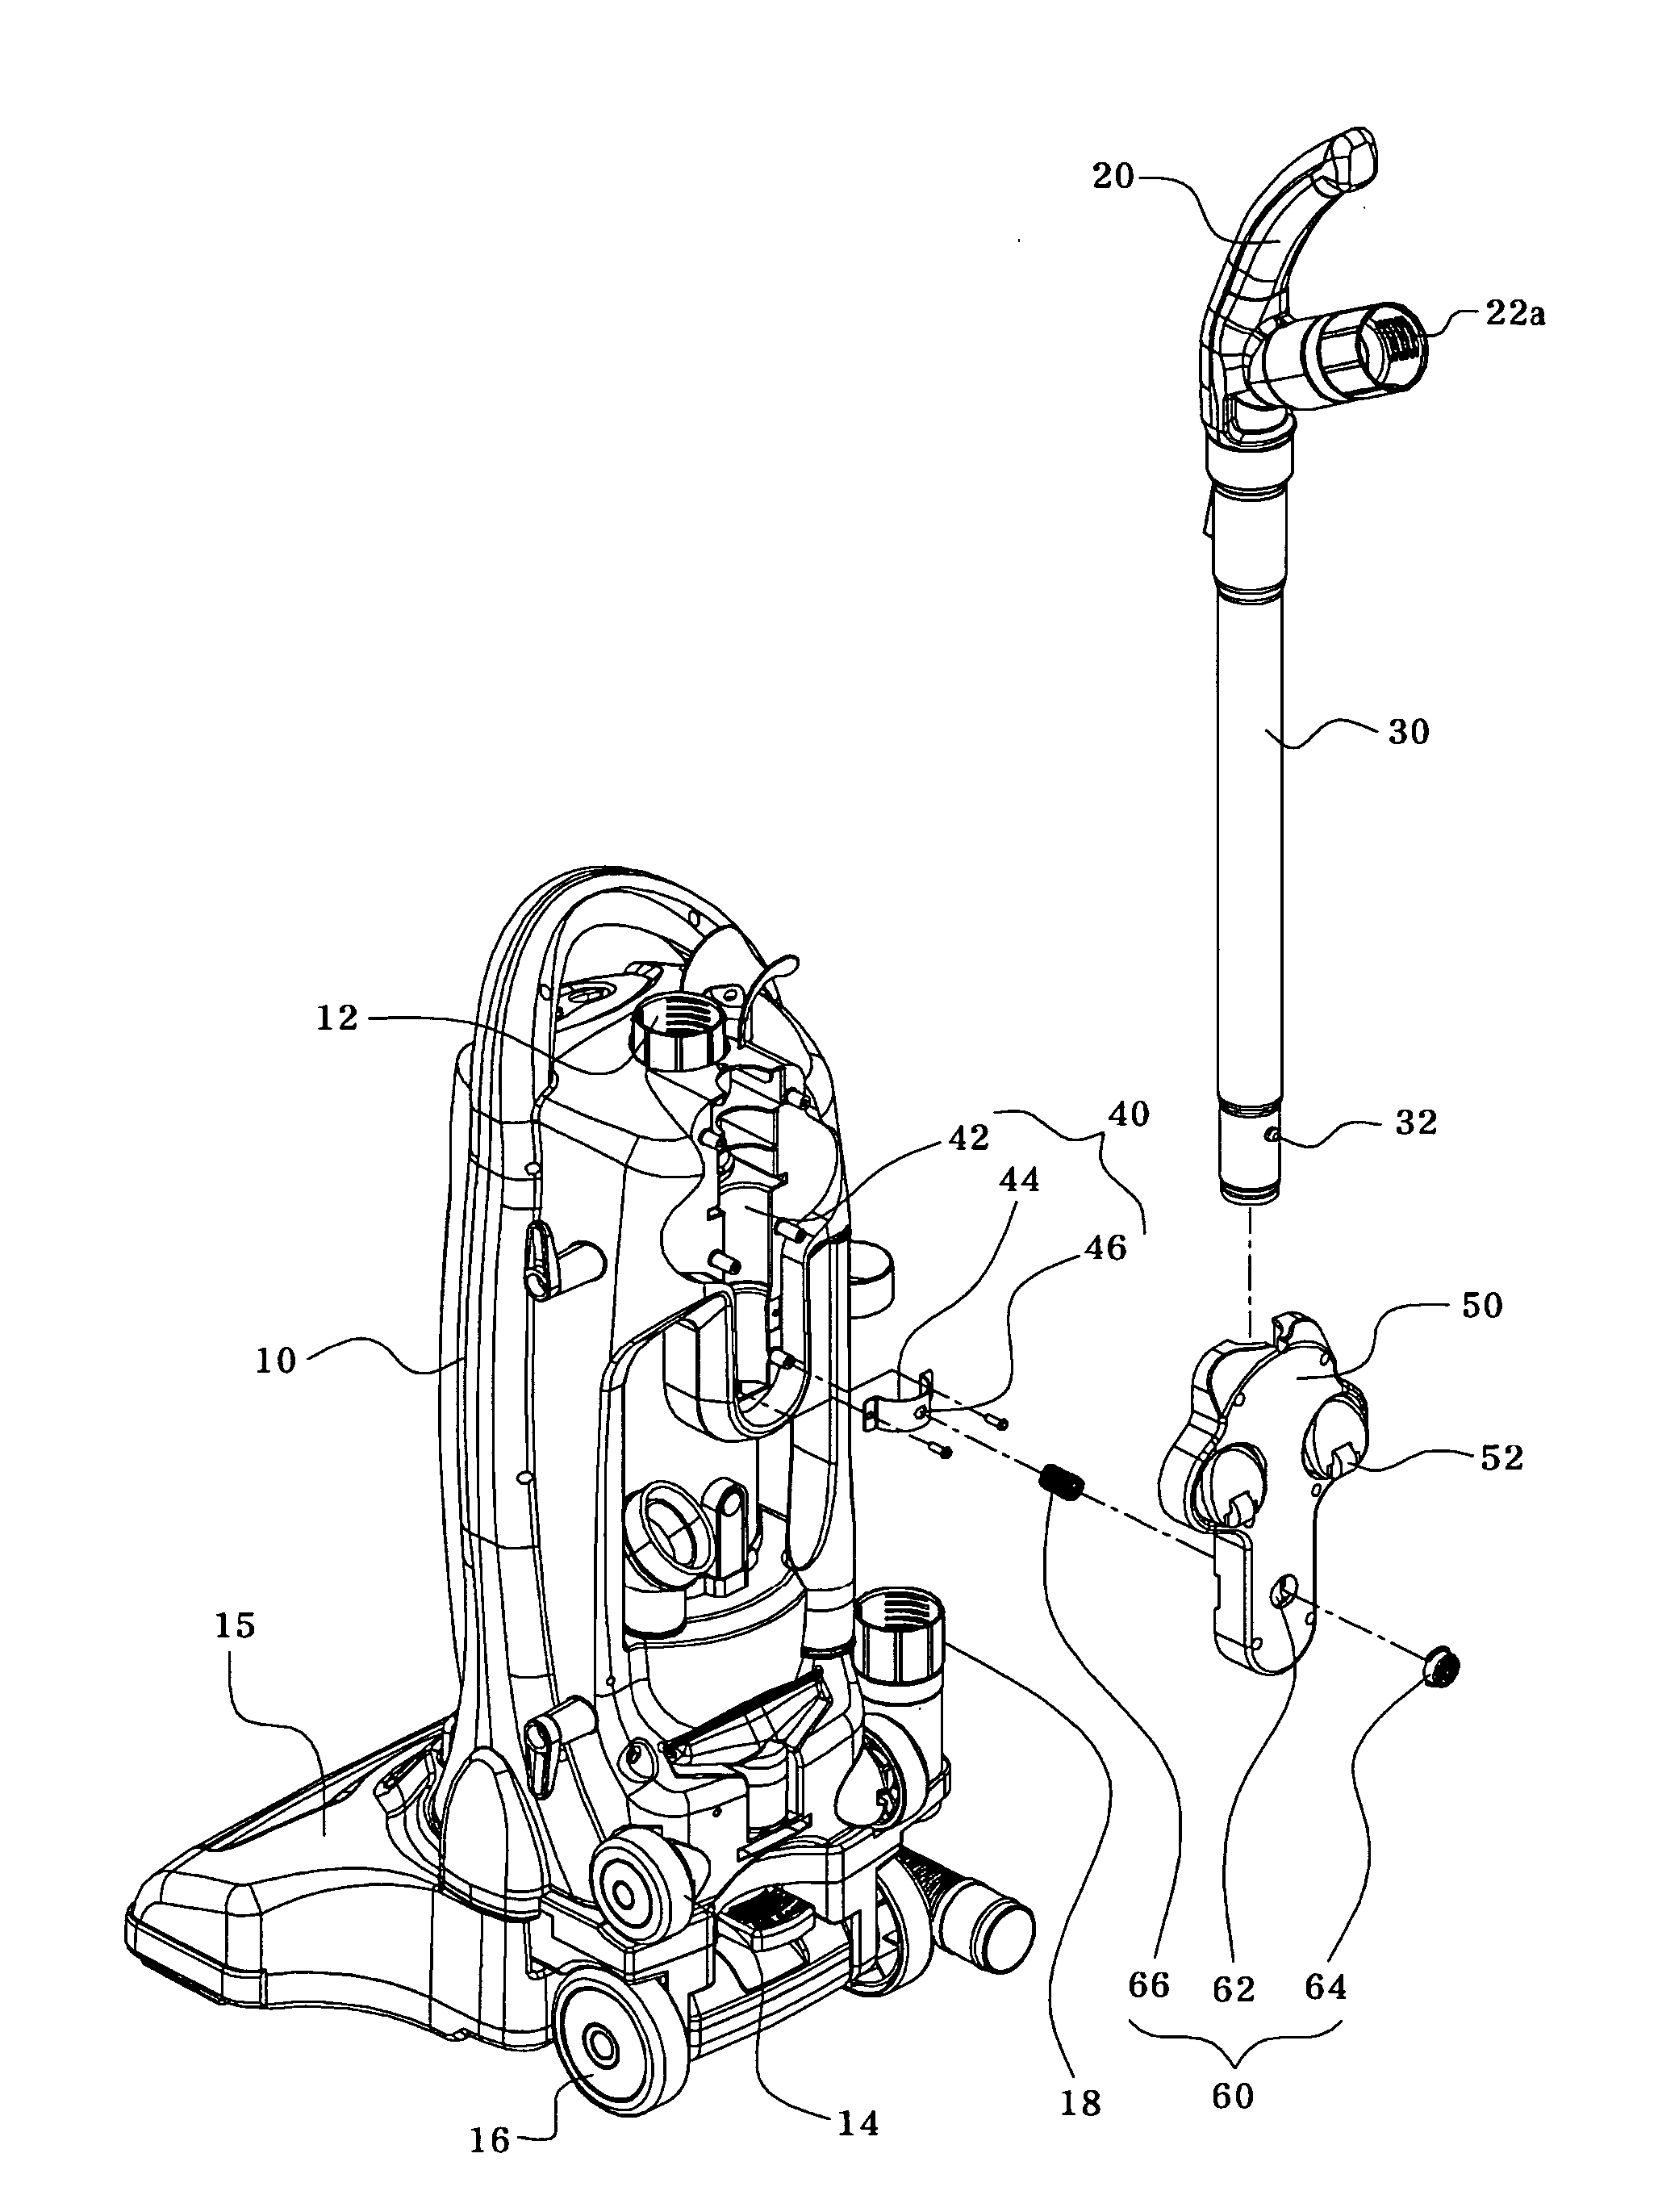 Upright type vacuum cleaner capable of being converted to canister type